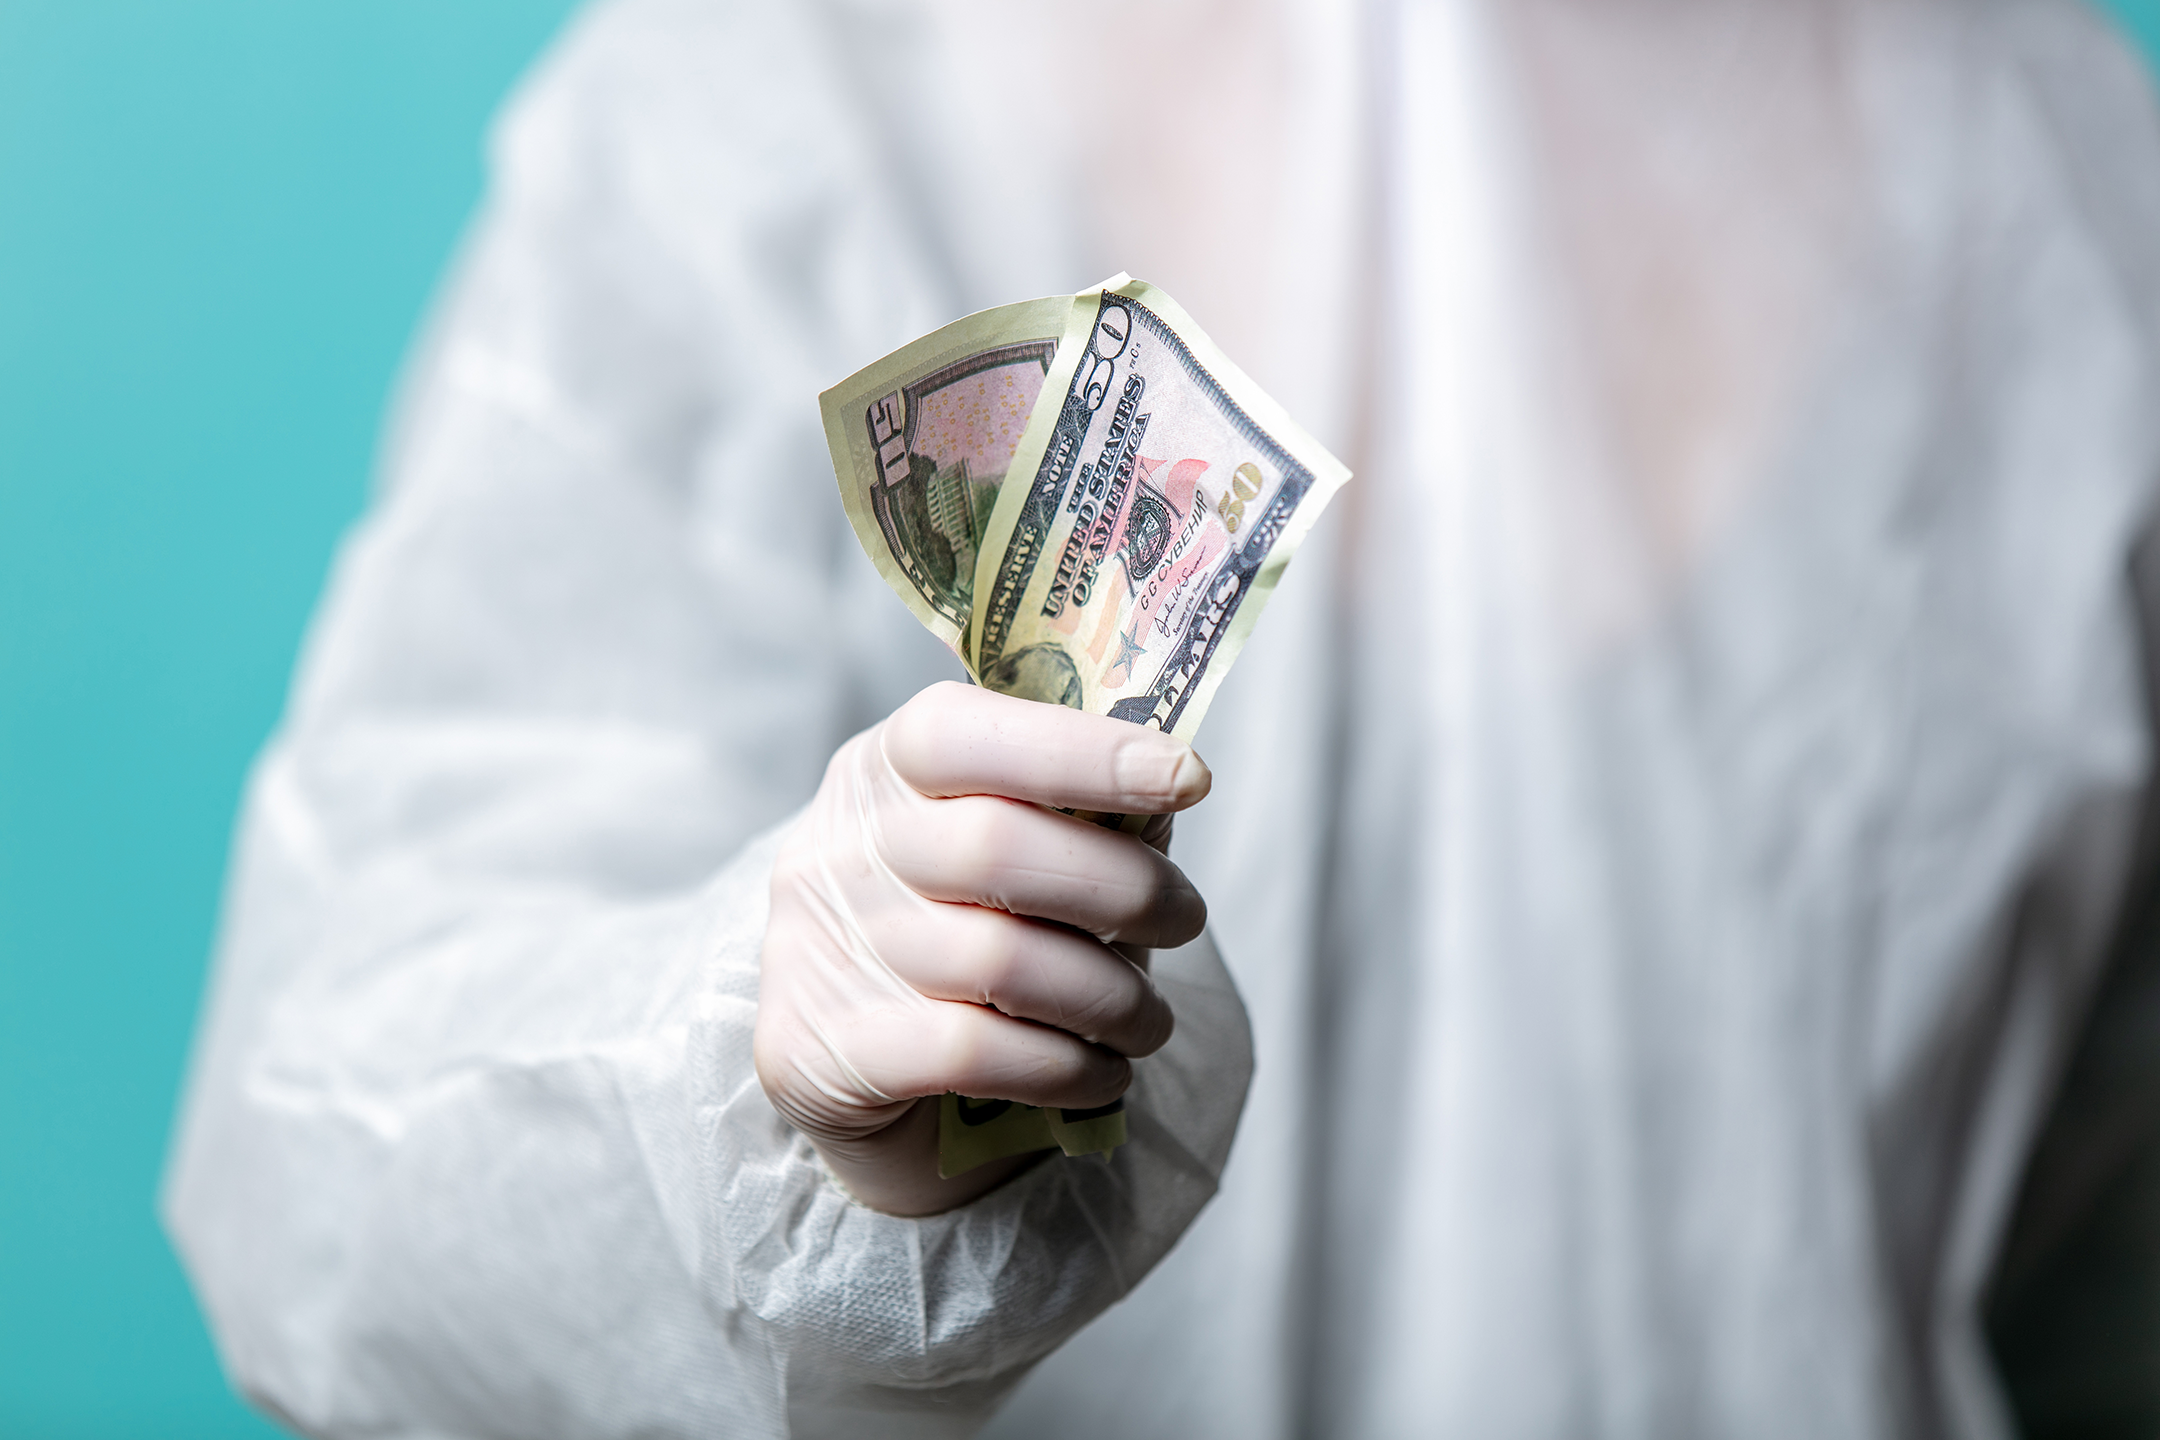 OIG: For per-patient fees, fair market value is not enough